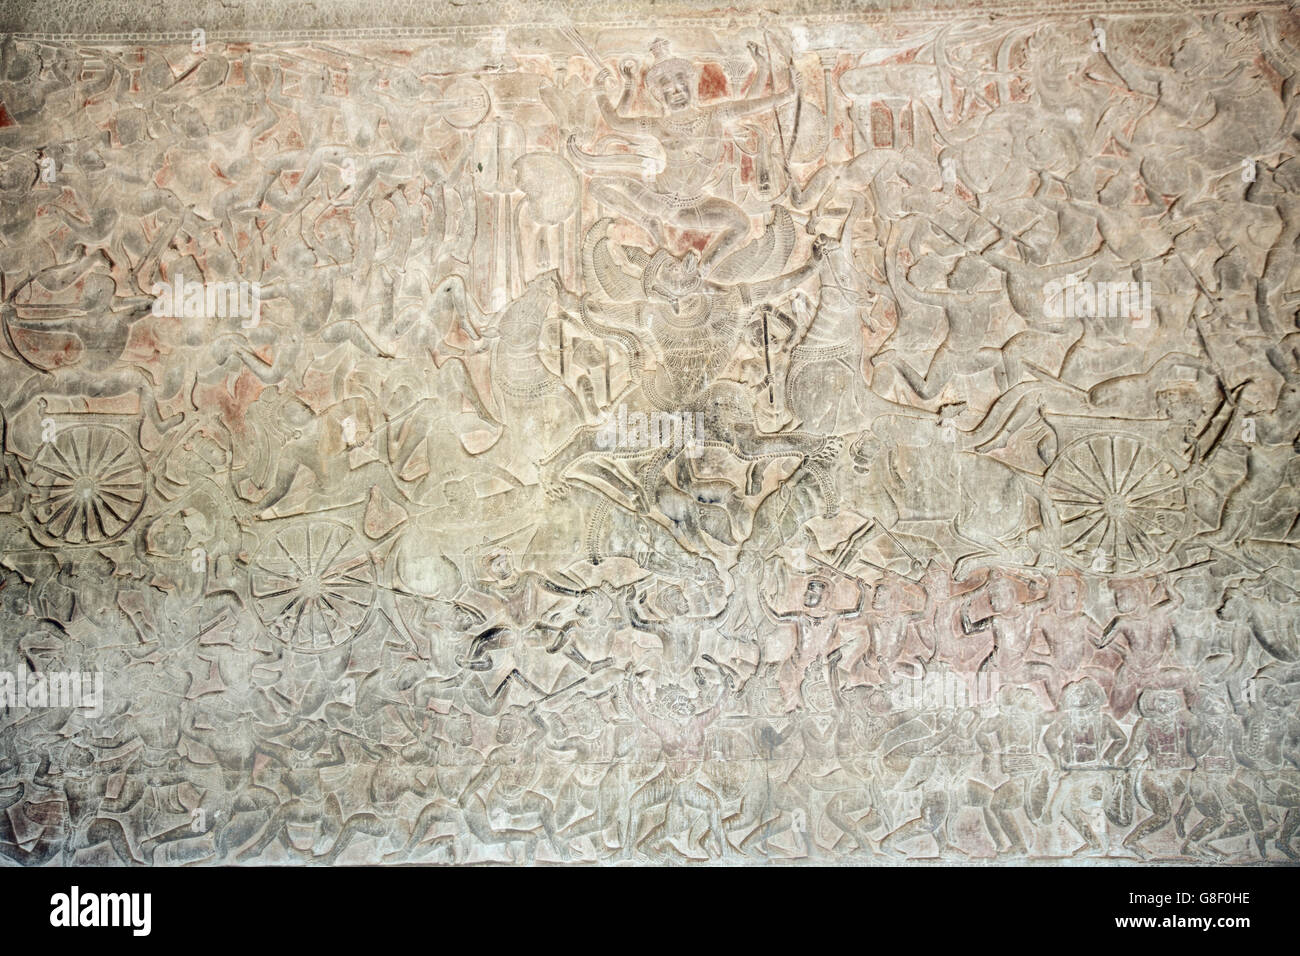 Carvings on friezes at Angkor Wat Stock Photo